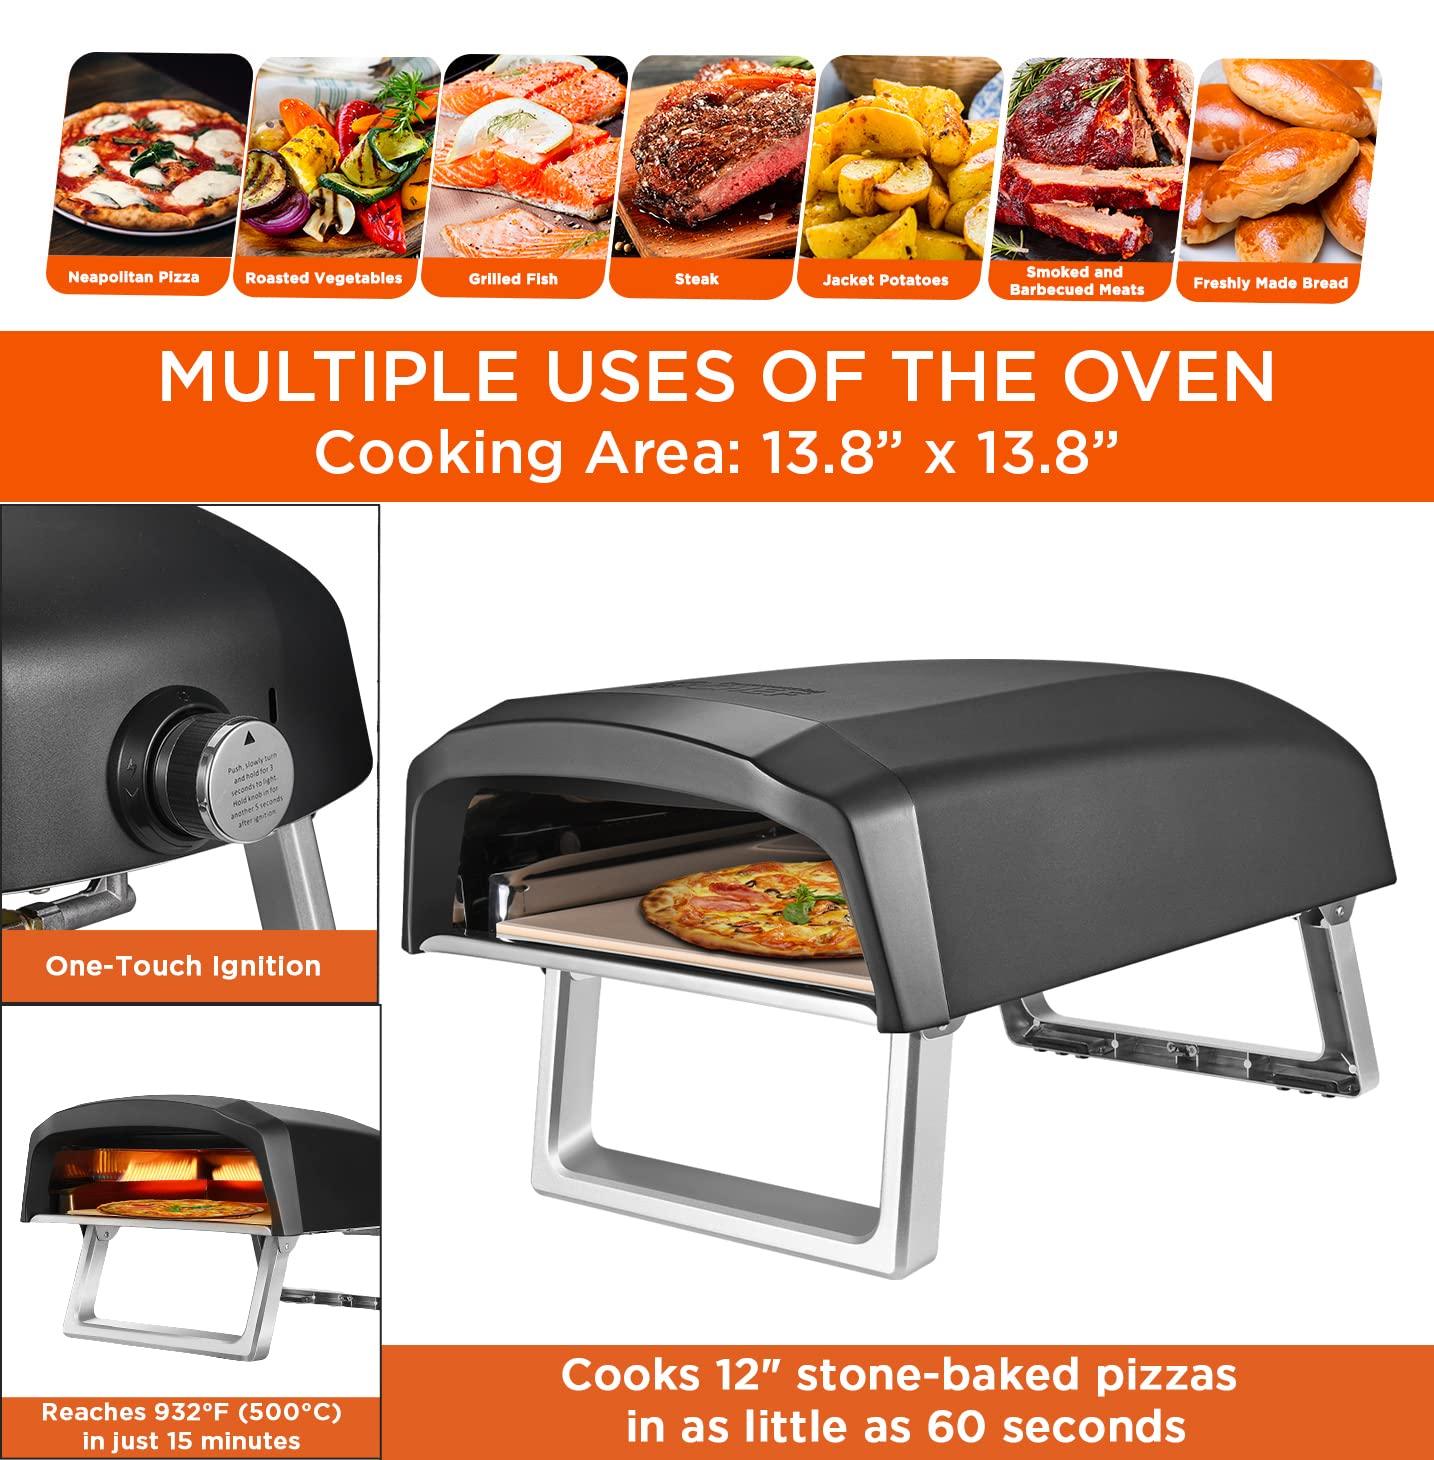 Commercial Chef Pizza Oven Outdoor - Gas Pizza Oven Propane - Portable Pizza Ovens for Outside - Stone Brick Pizza Maker Oven Grill - with Pizza Oven Door, Peel, Pizza Stone, Cutter, and Carry Cover - CookCave